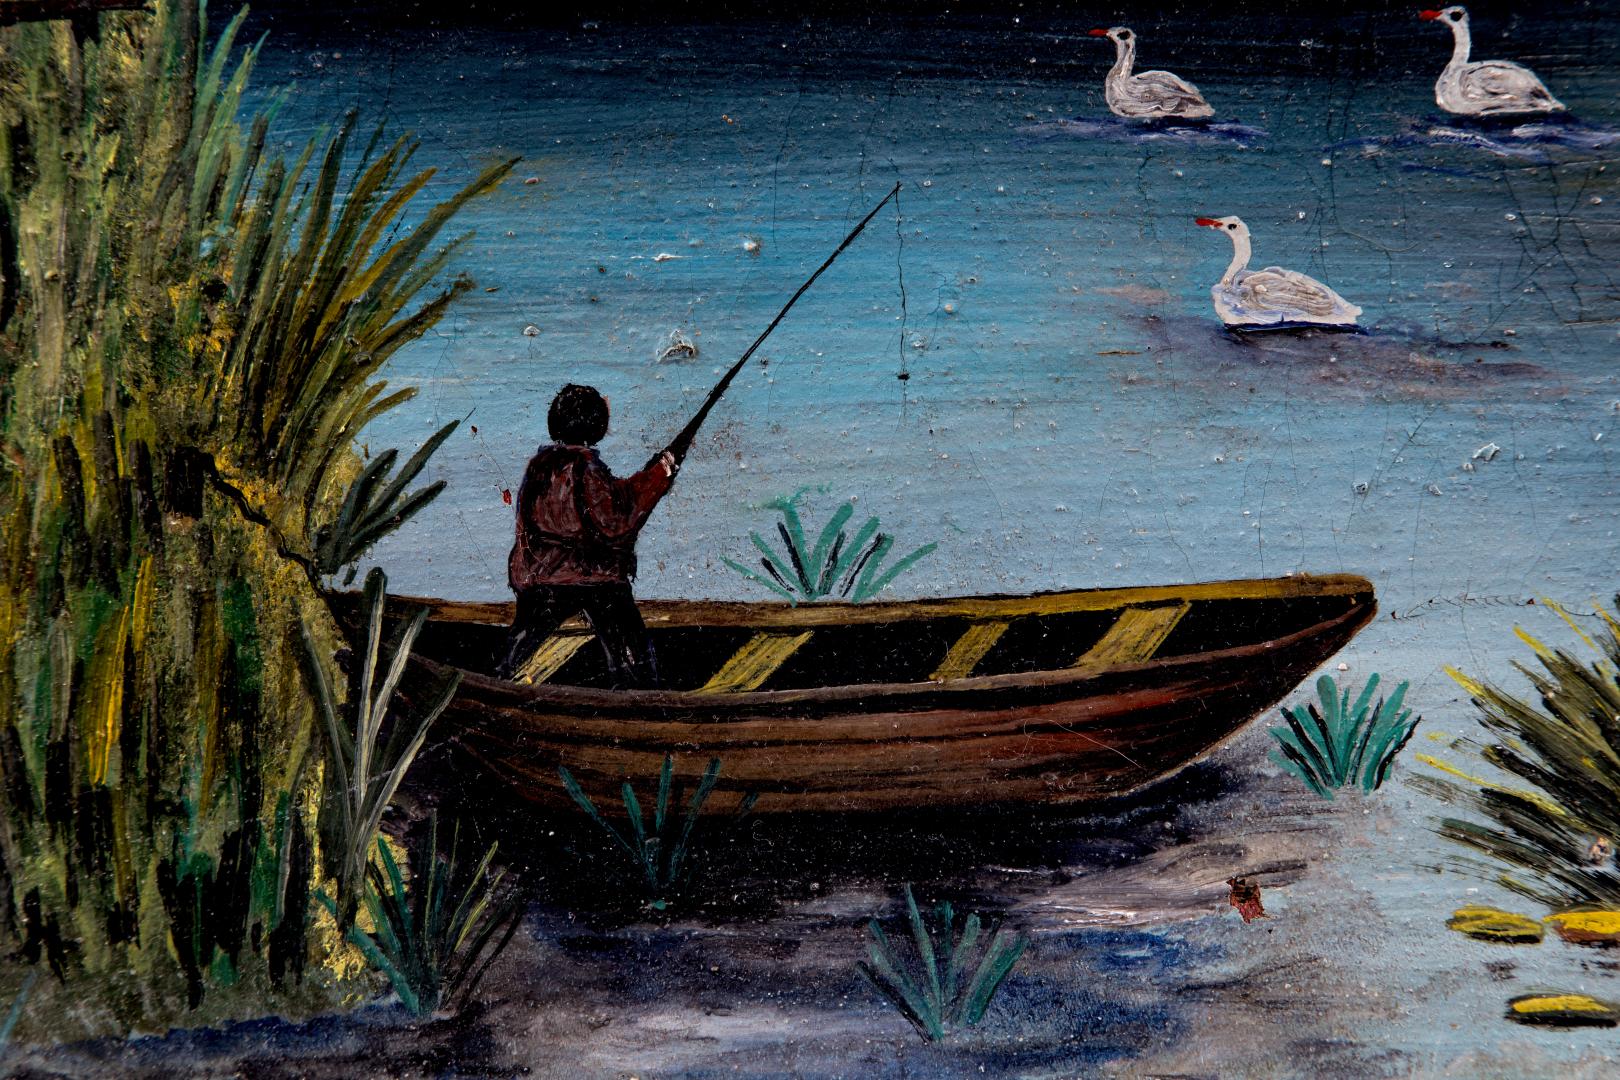 Rural landscape with a fisherman